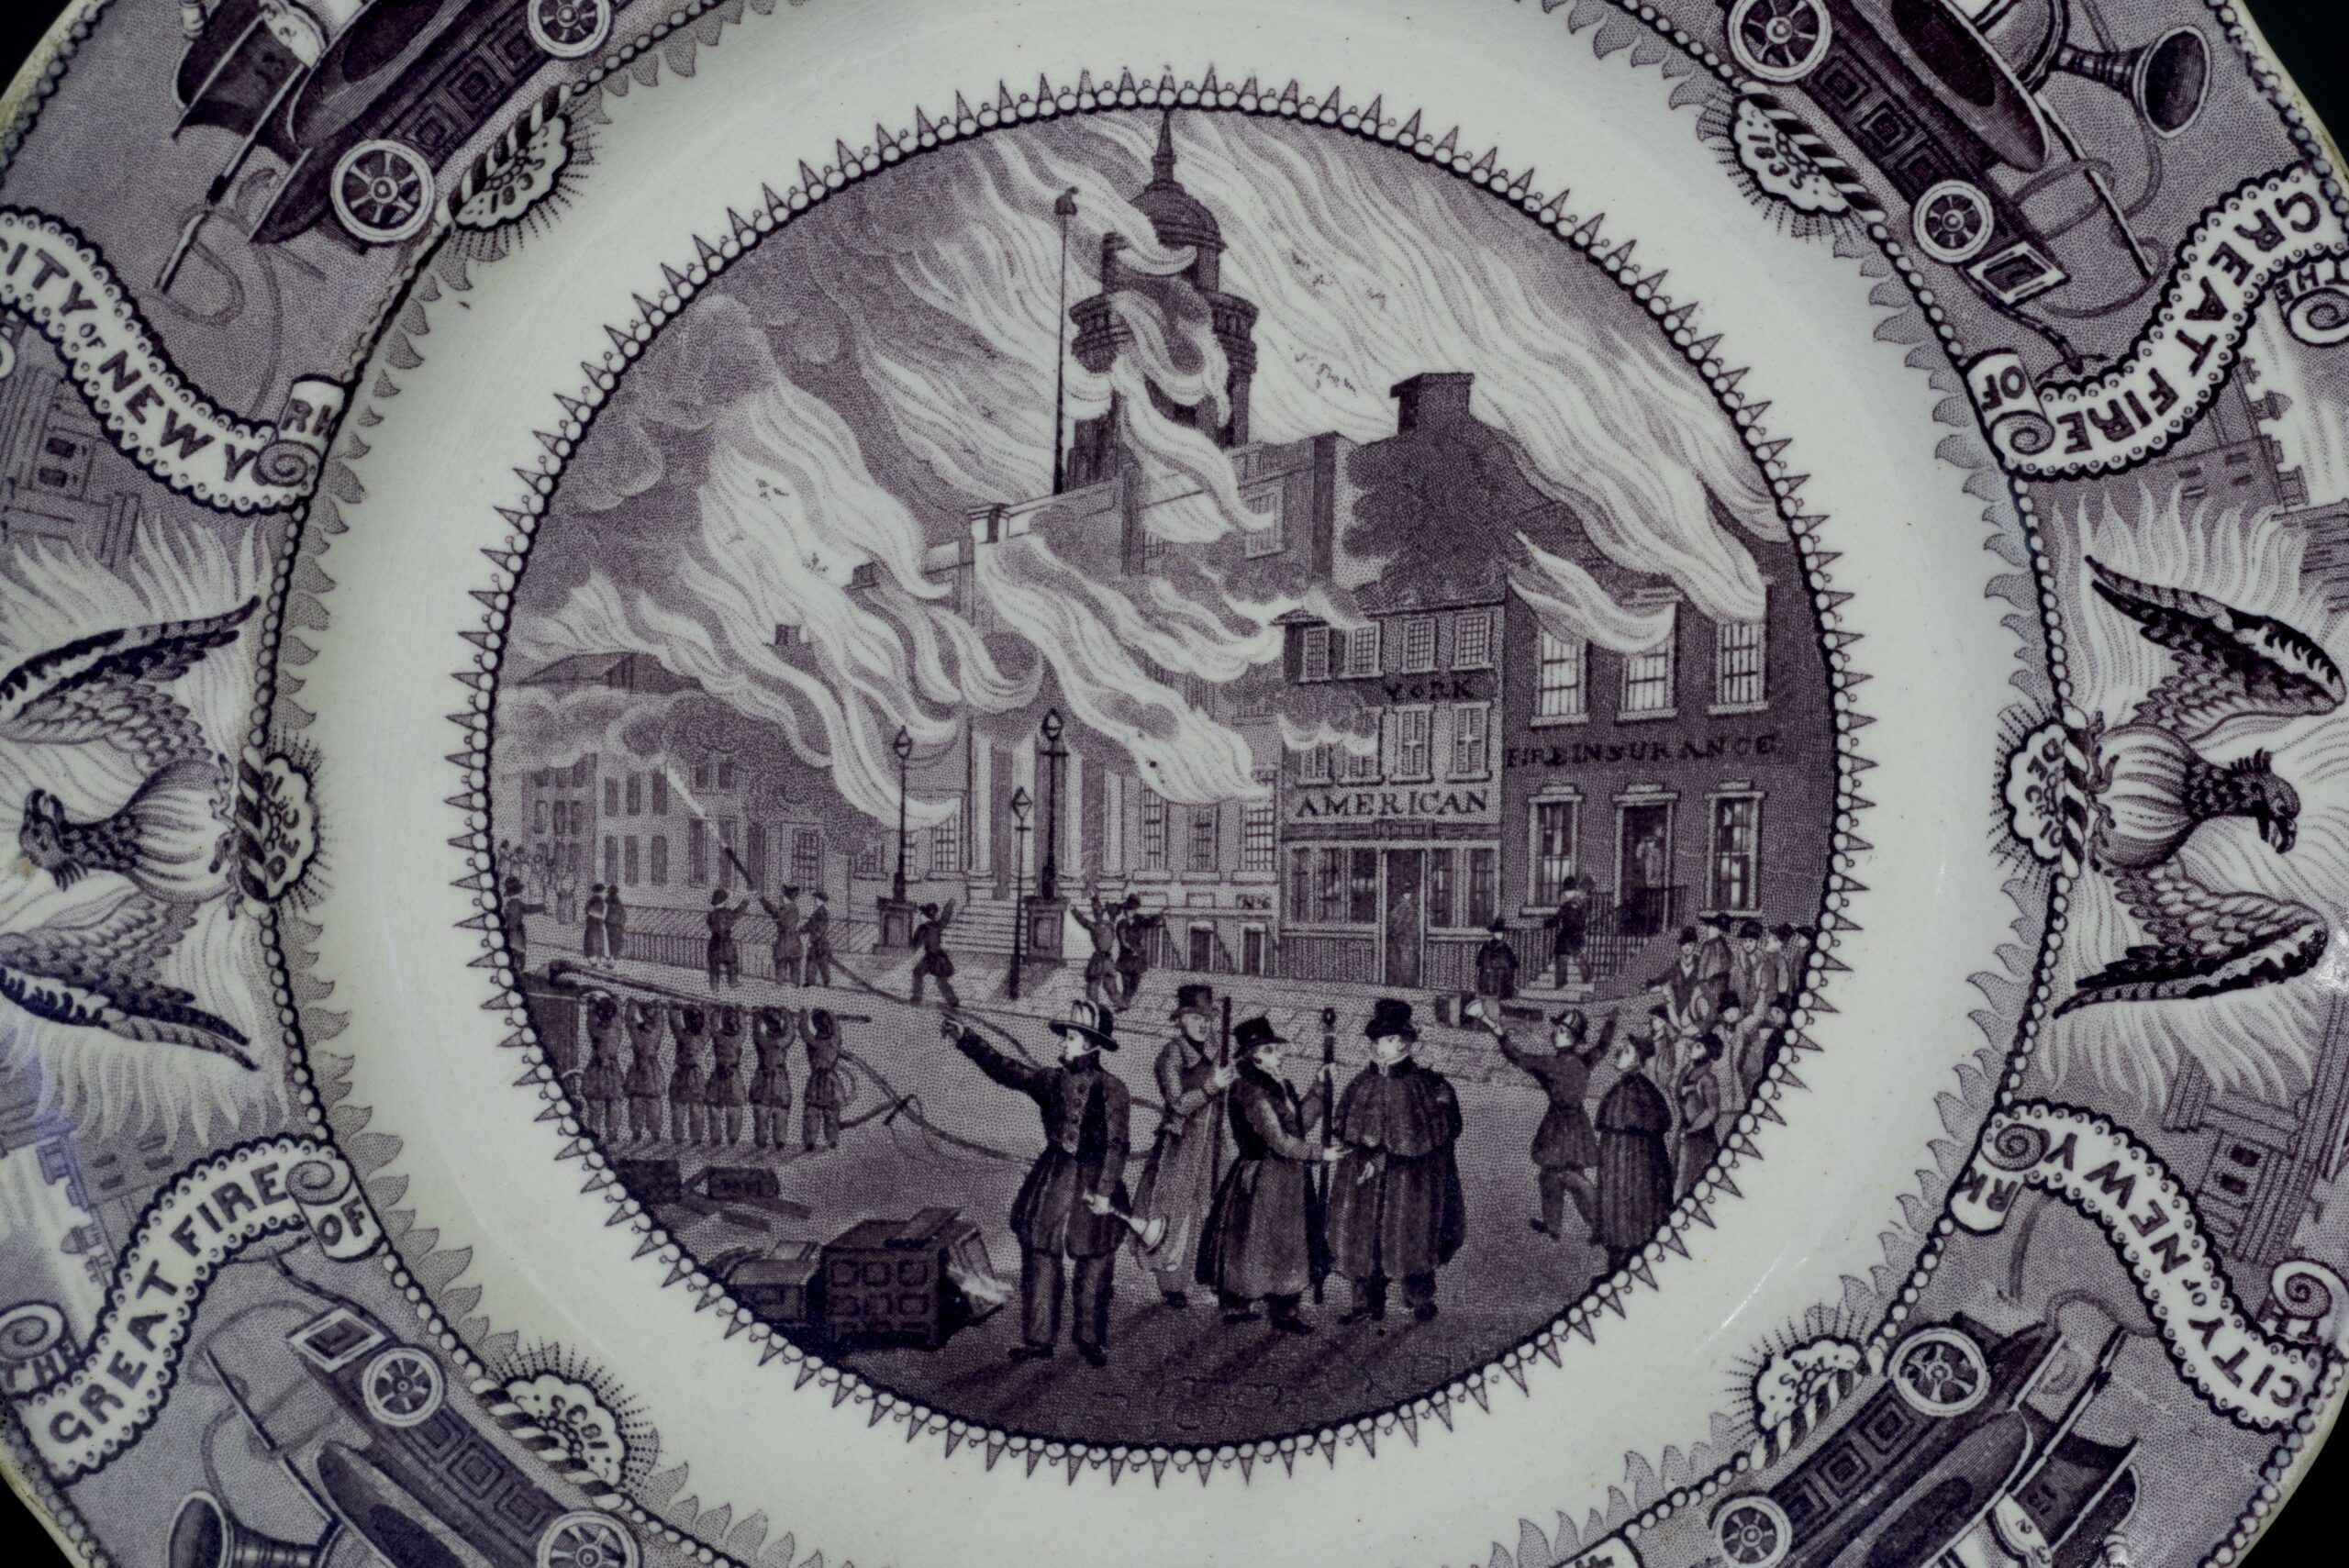 great fire transferred onto a plate